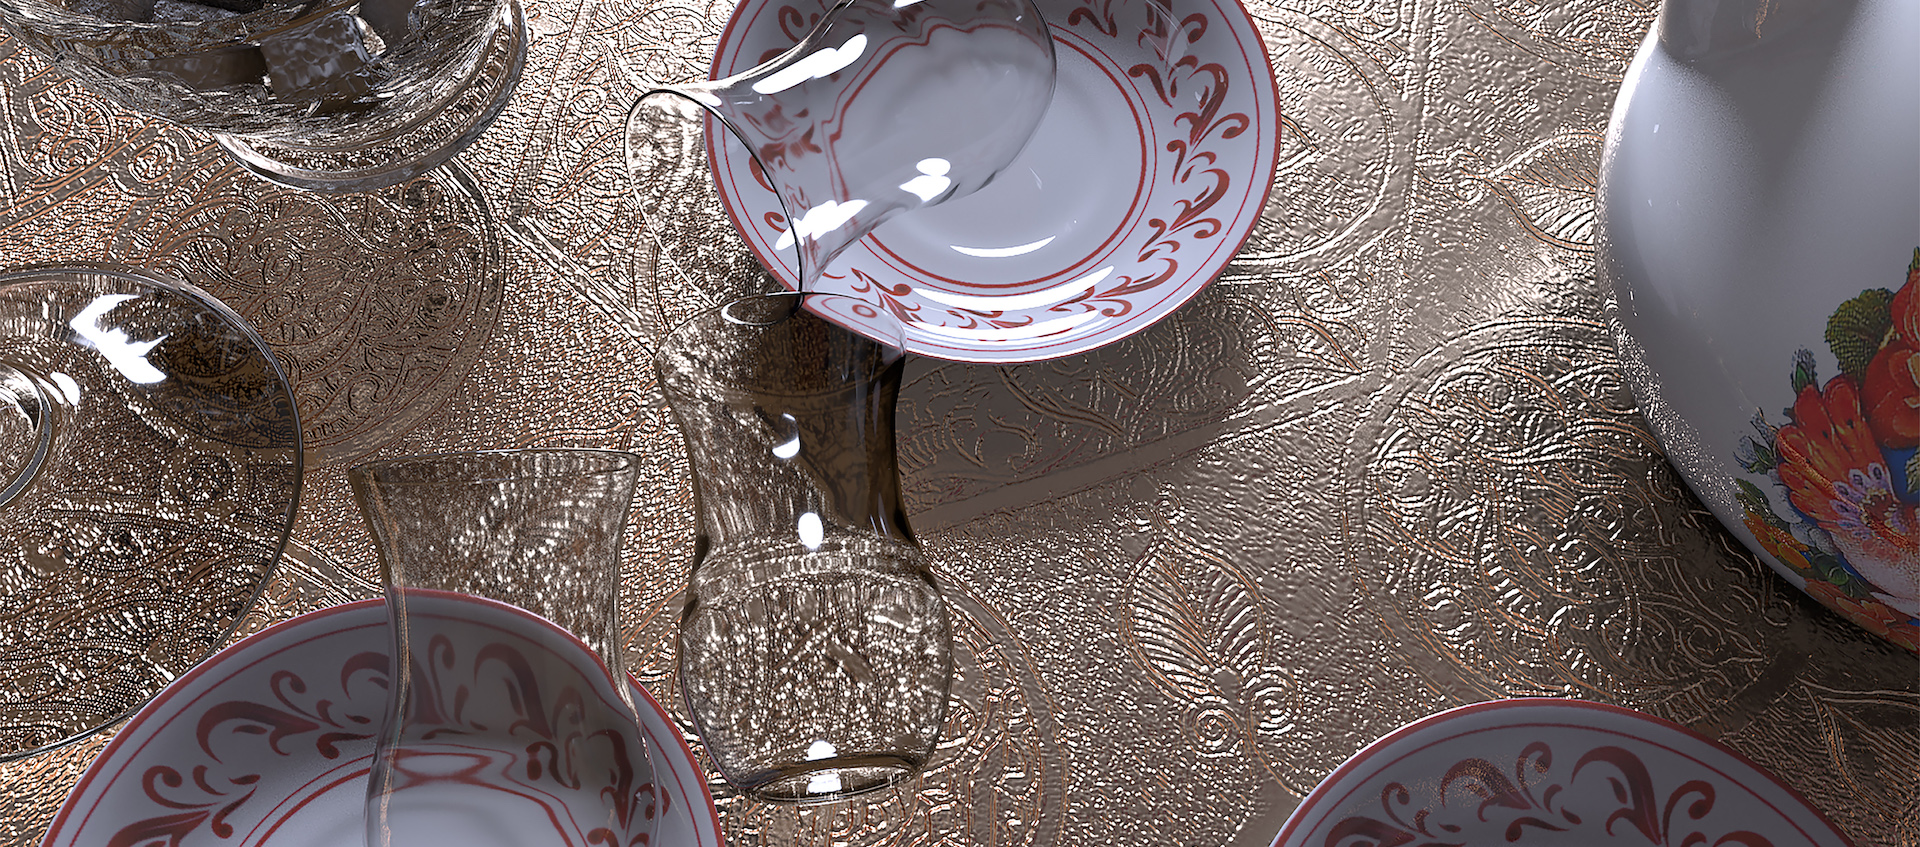 An animated image of glassware and white and orange dishes against a gold background with embossed design.